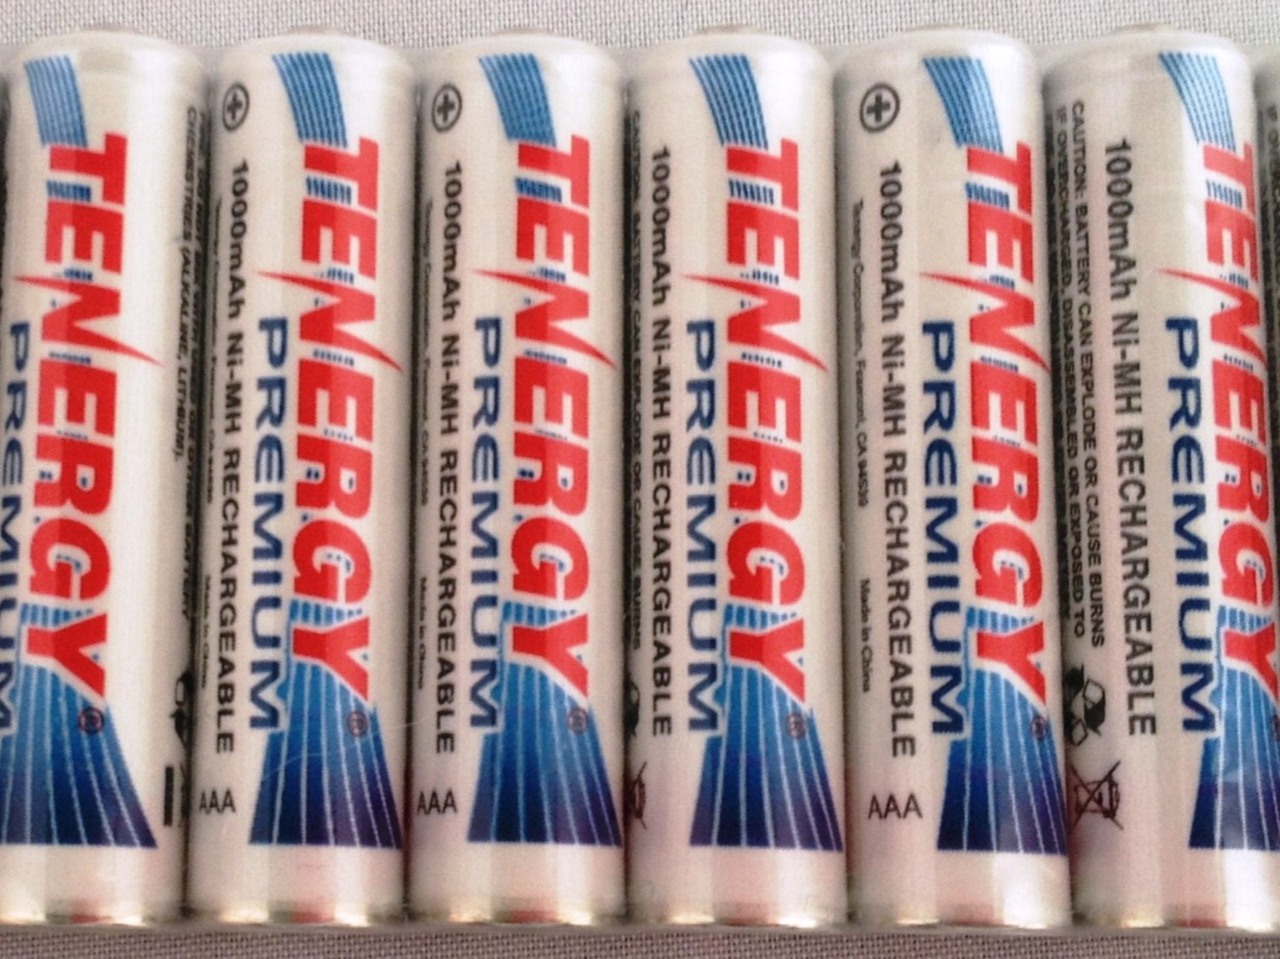 Tenergy Premium AAA NiMH 1000 MAh 1.2 V Rechargeable Batteries - 12 Pack + FREE SHIPPING!